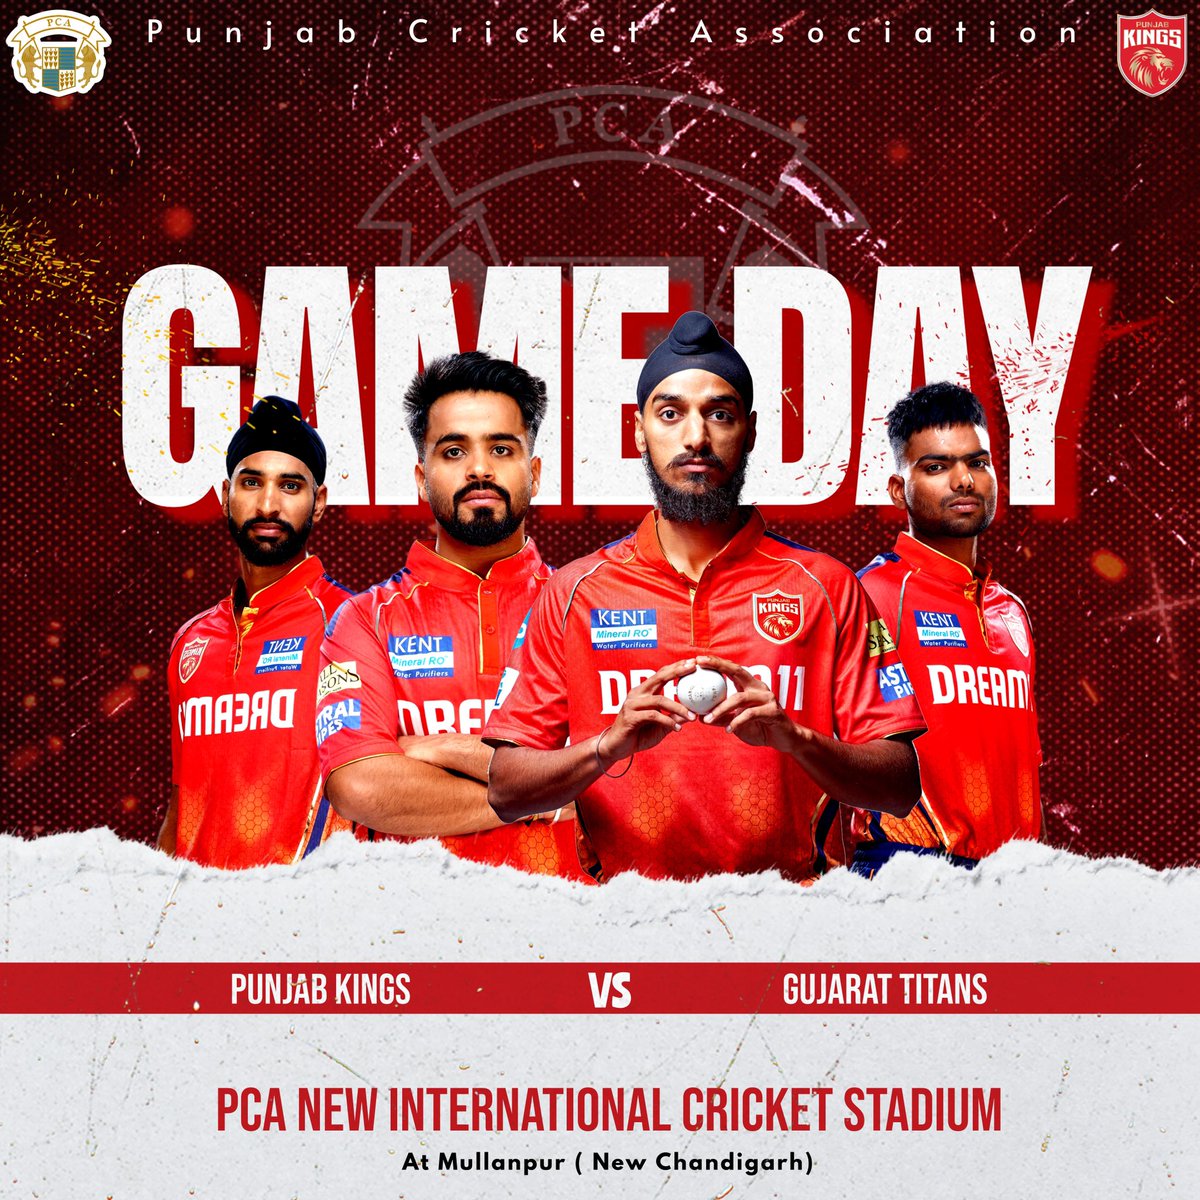 Run to the finish!: Don't miss Punjab Kings in the last match of the season at the PCA International Cricket Stadium at Mullanpur. See the team in live action against Gujarat Titans . Few hours to go, get your seats now for the game day.